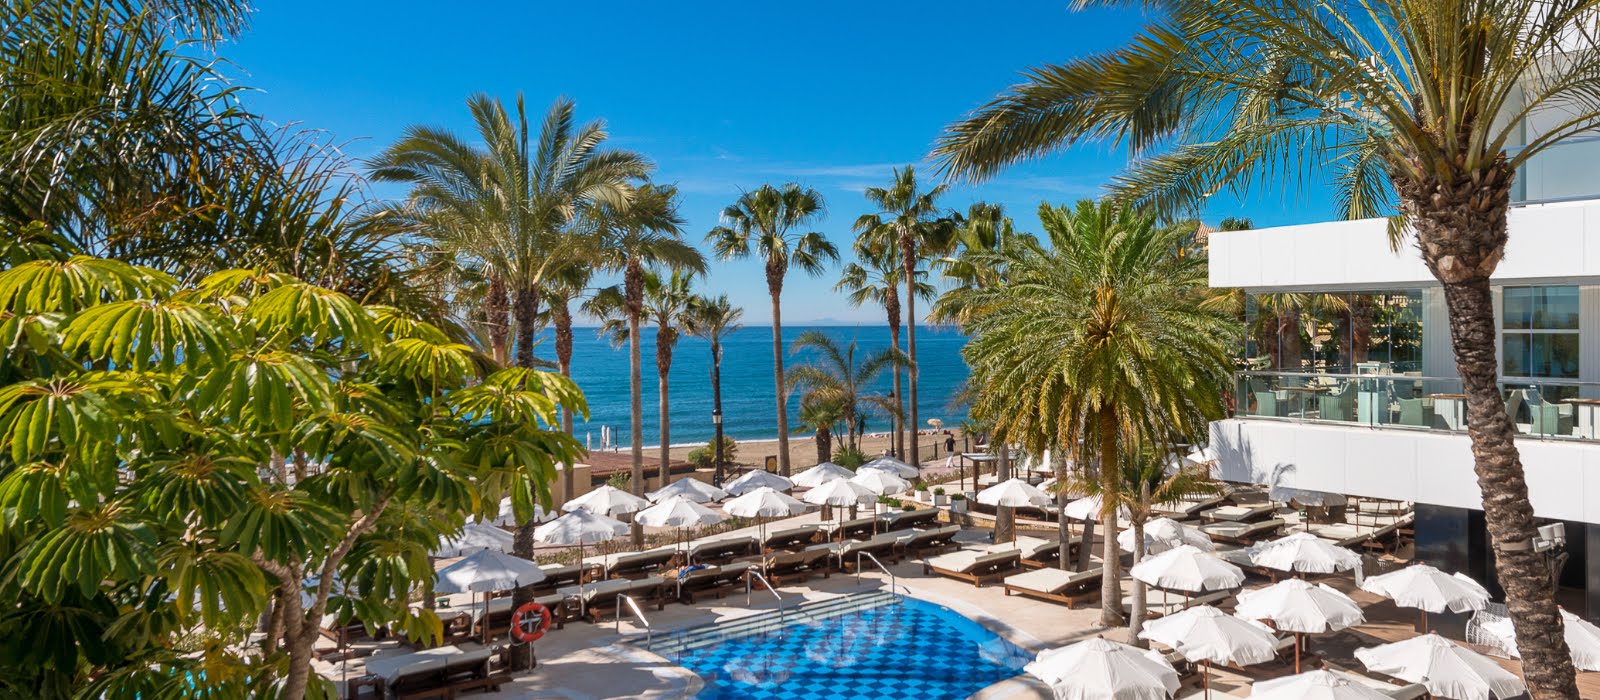 Amaré Hotel Marbella: A glittering seaside resort where relaxation abounds